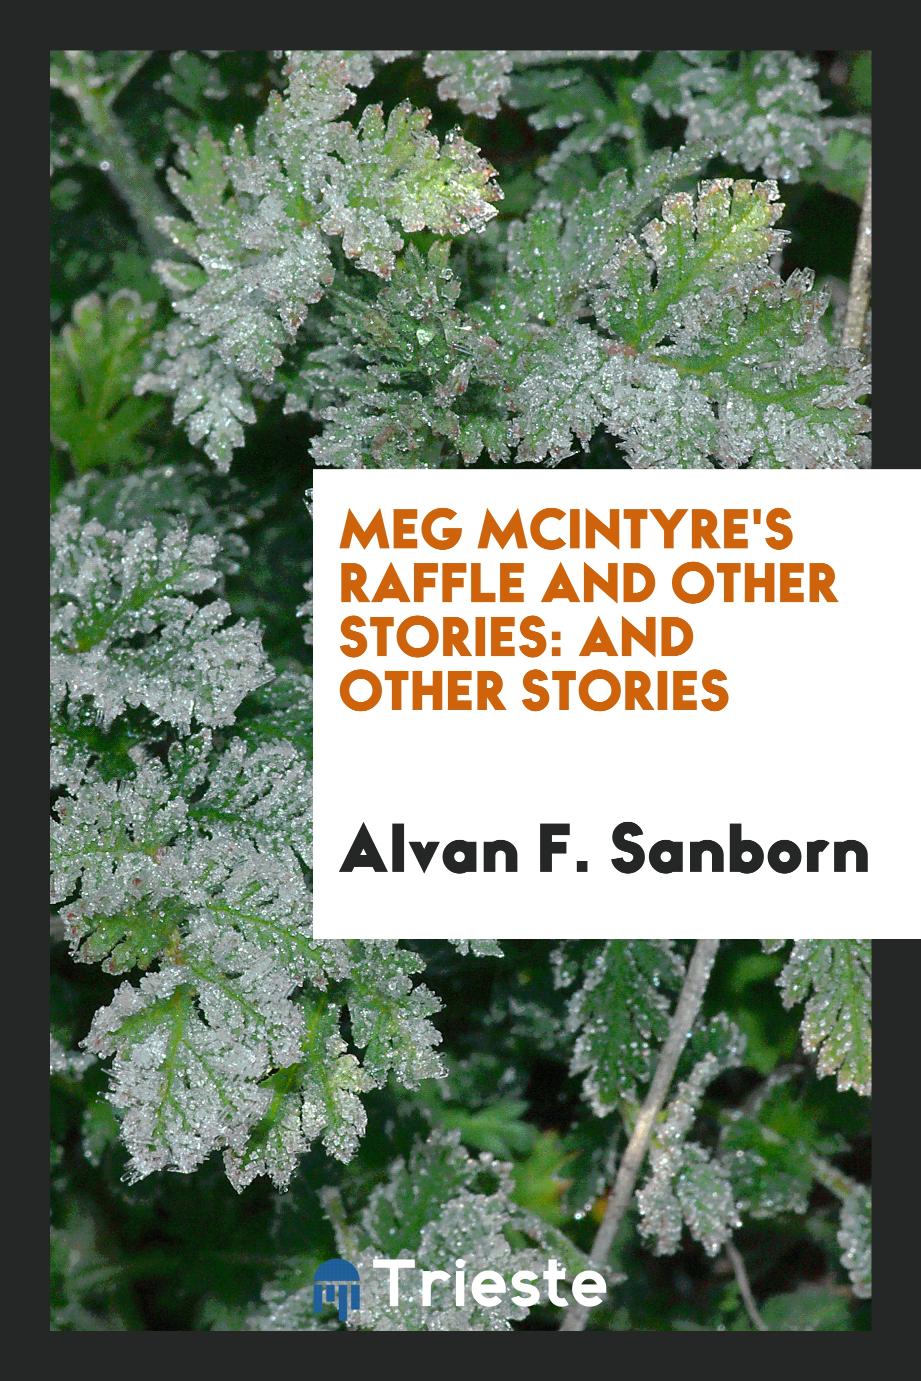 Meg McIntyre's Raffle and Other Stories: And Other Stories